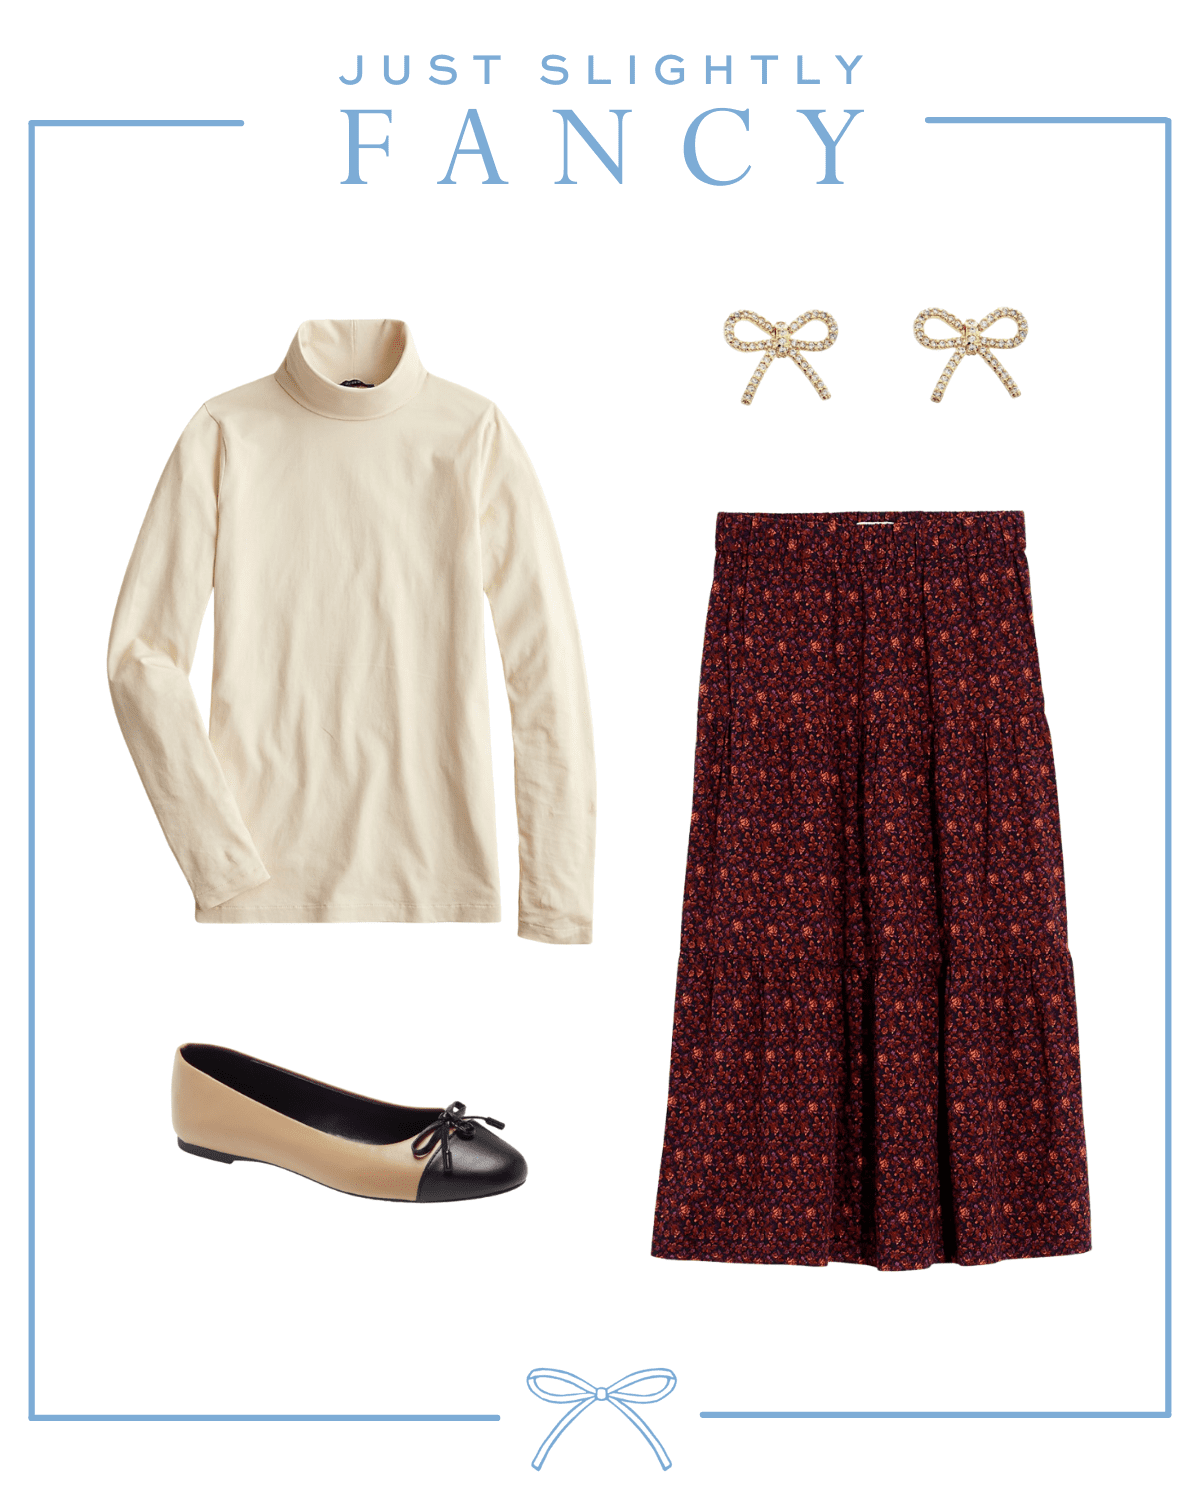 Thanksgiving outfit ideas that are comfy yet elegant